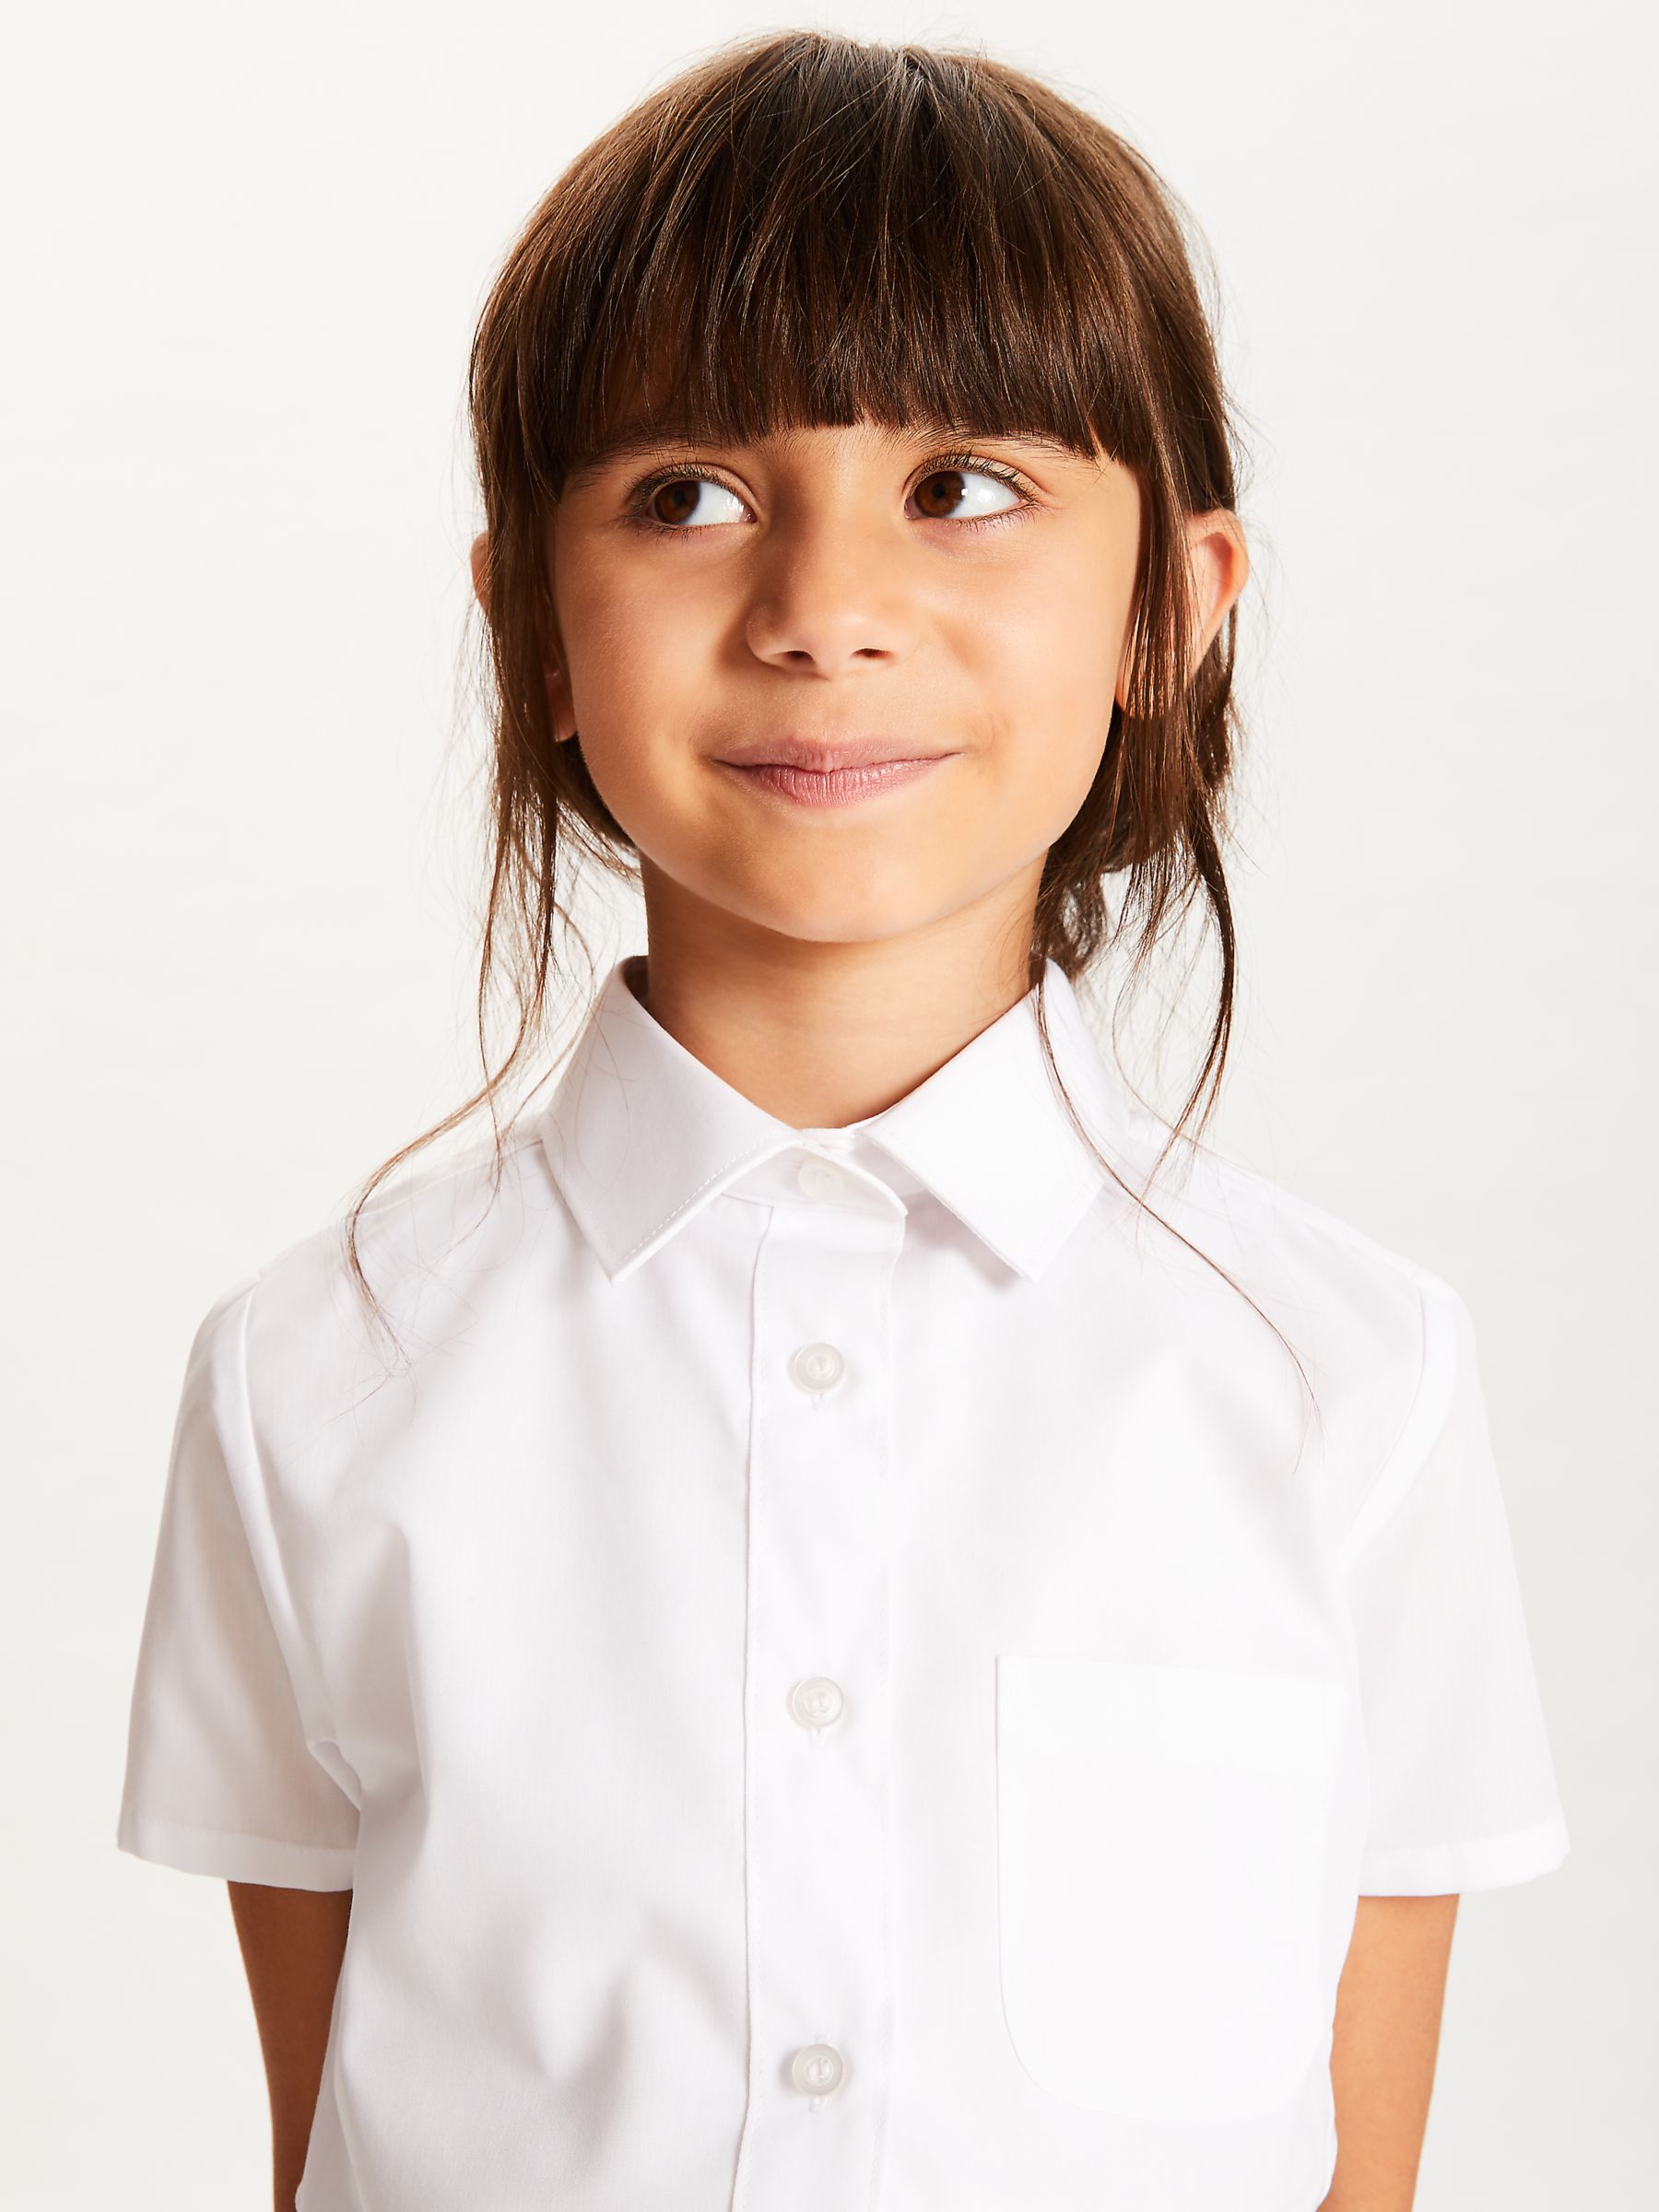 Buy John Lewis ANYDAY Kids' School Shirts, Pack of 3 Online at johnlewis.com